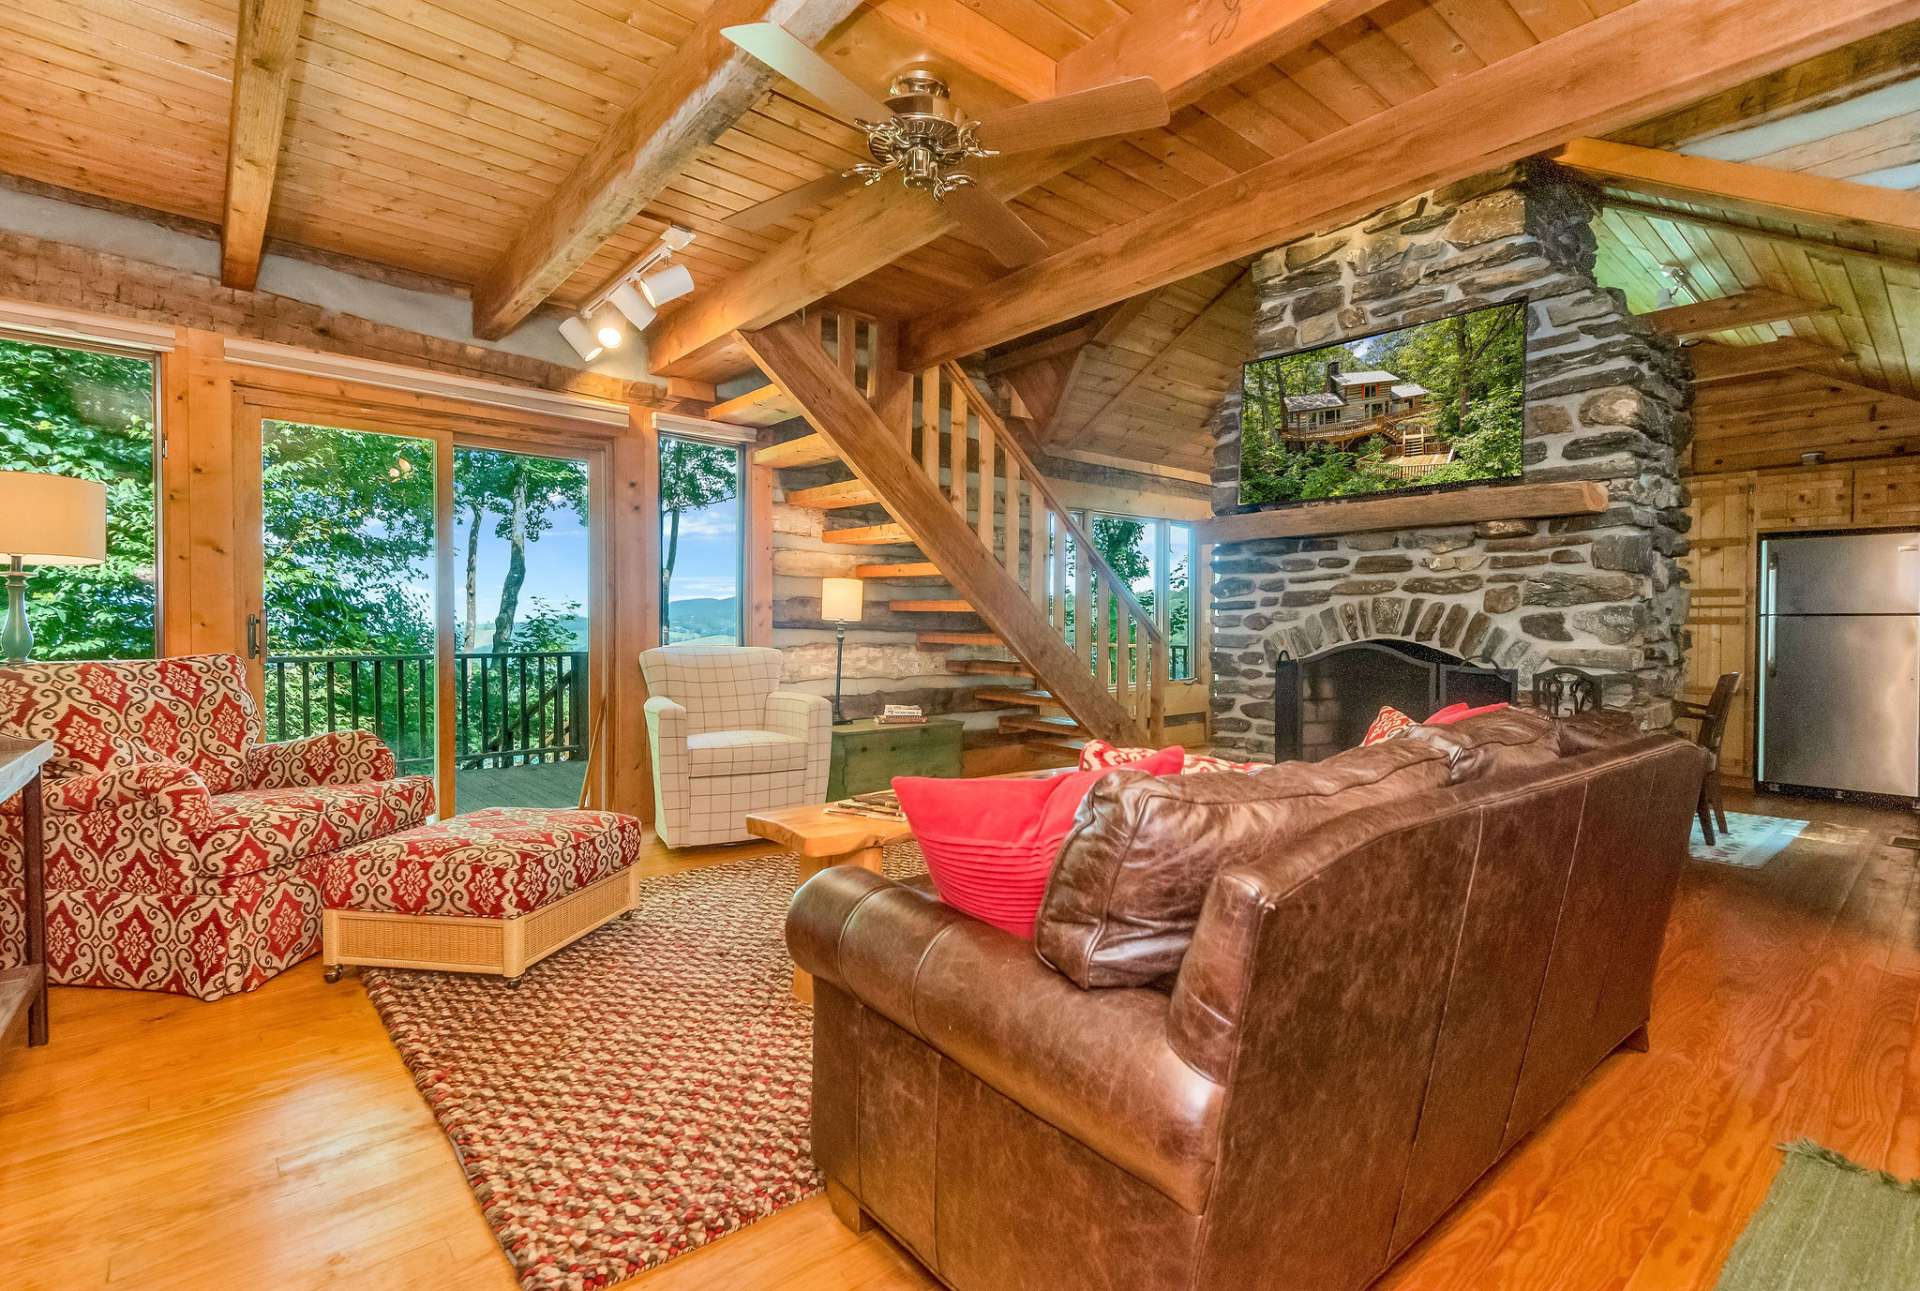 Walk inside to a warm and inviting family room.